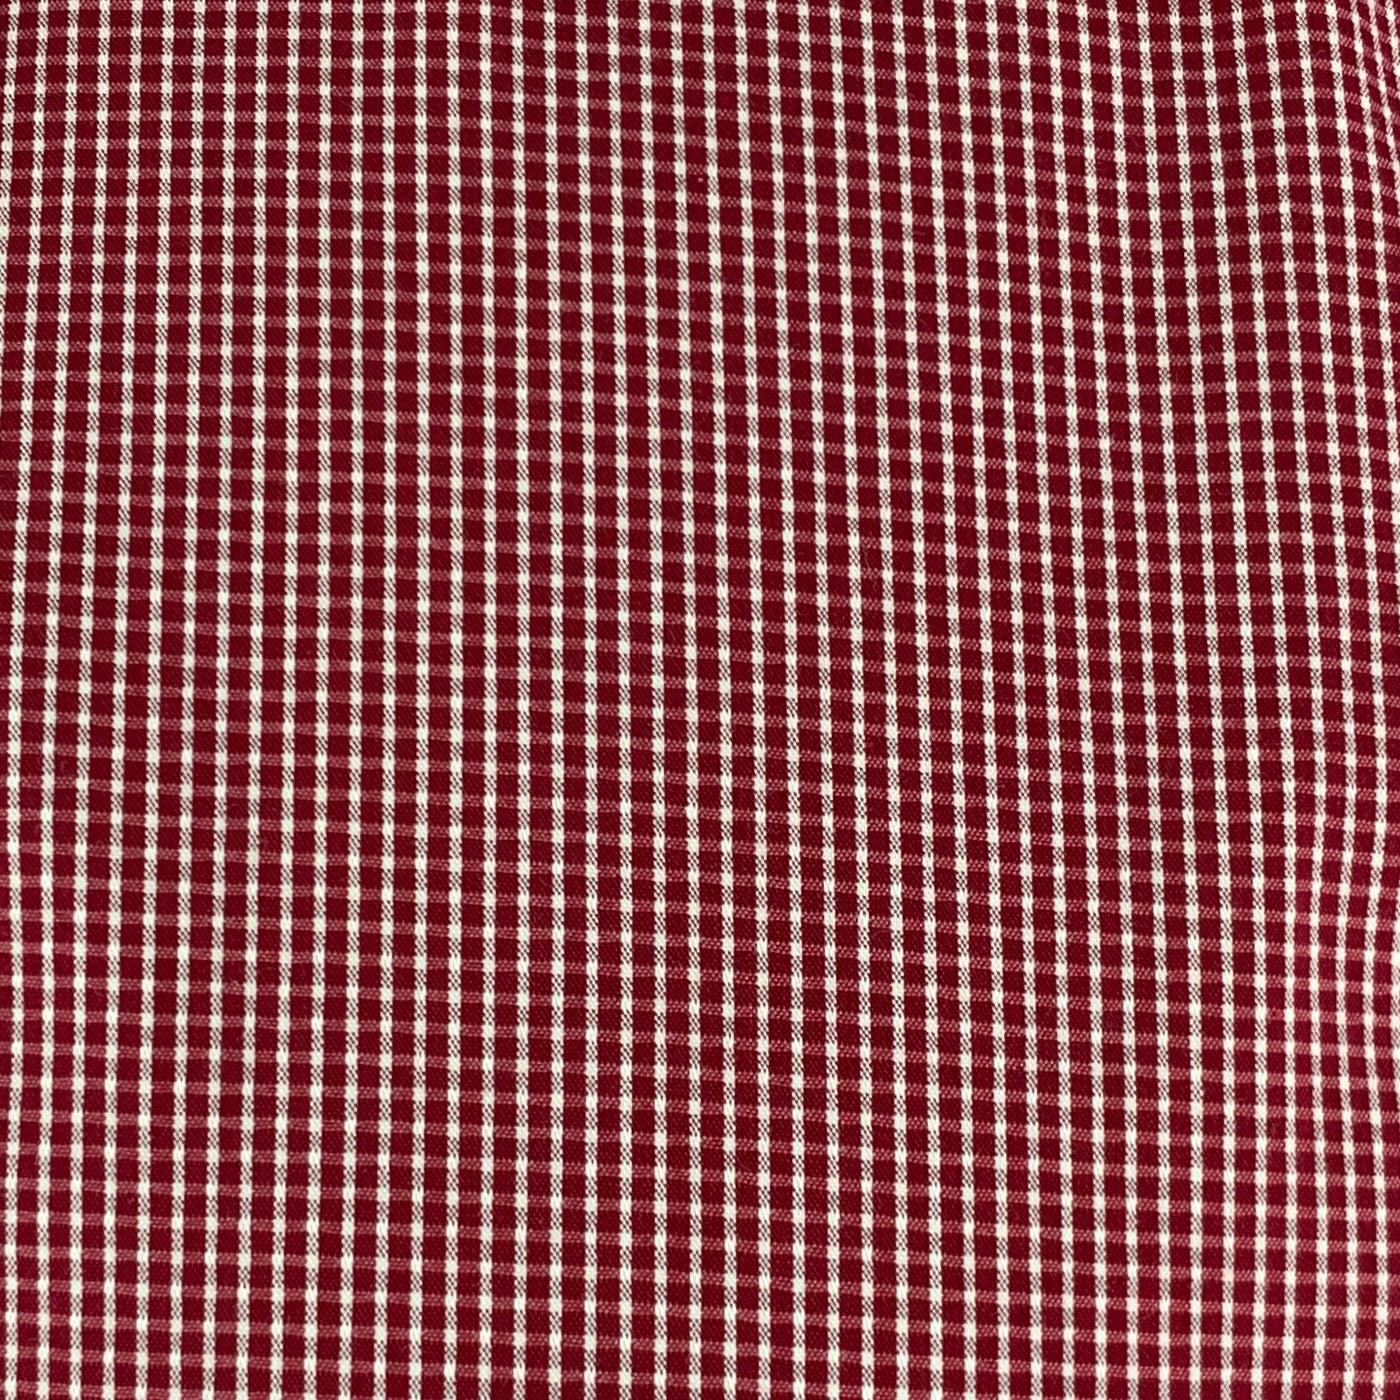 DOLCE & GABBANA long sleeve shirt in a red and white cotton fabric featuring grid pattern, spread collar, and button closure. Made in Italy.Excellent Pre-Owned Condition. 

Marked:   16/41 

Measurements: 
 
Shoulder: 16 inches Chest: 42 inches